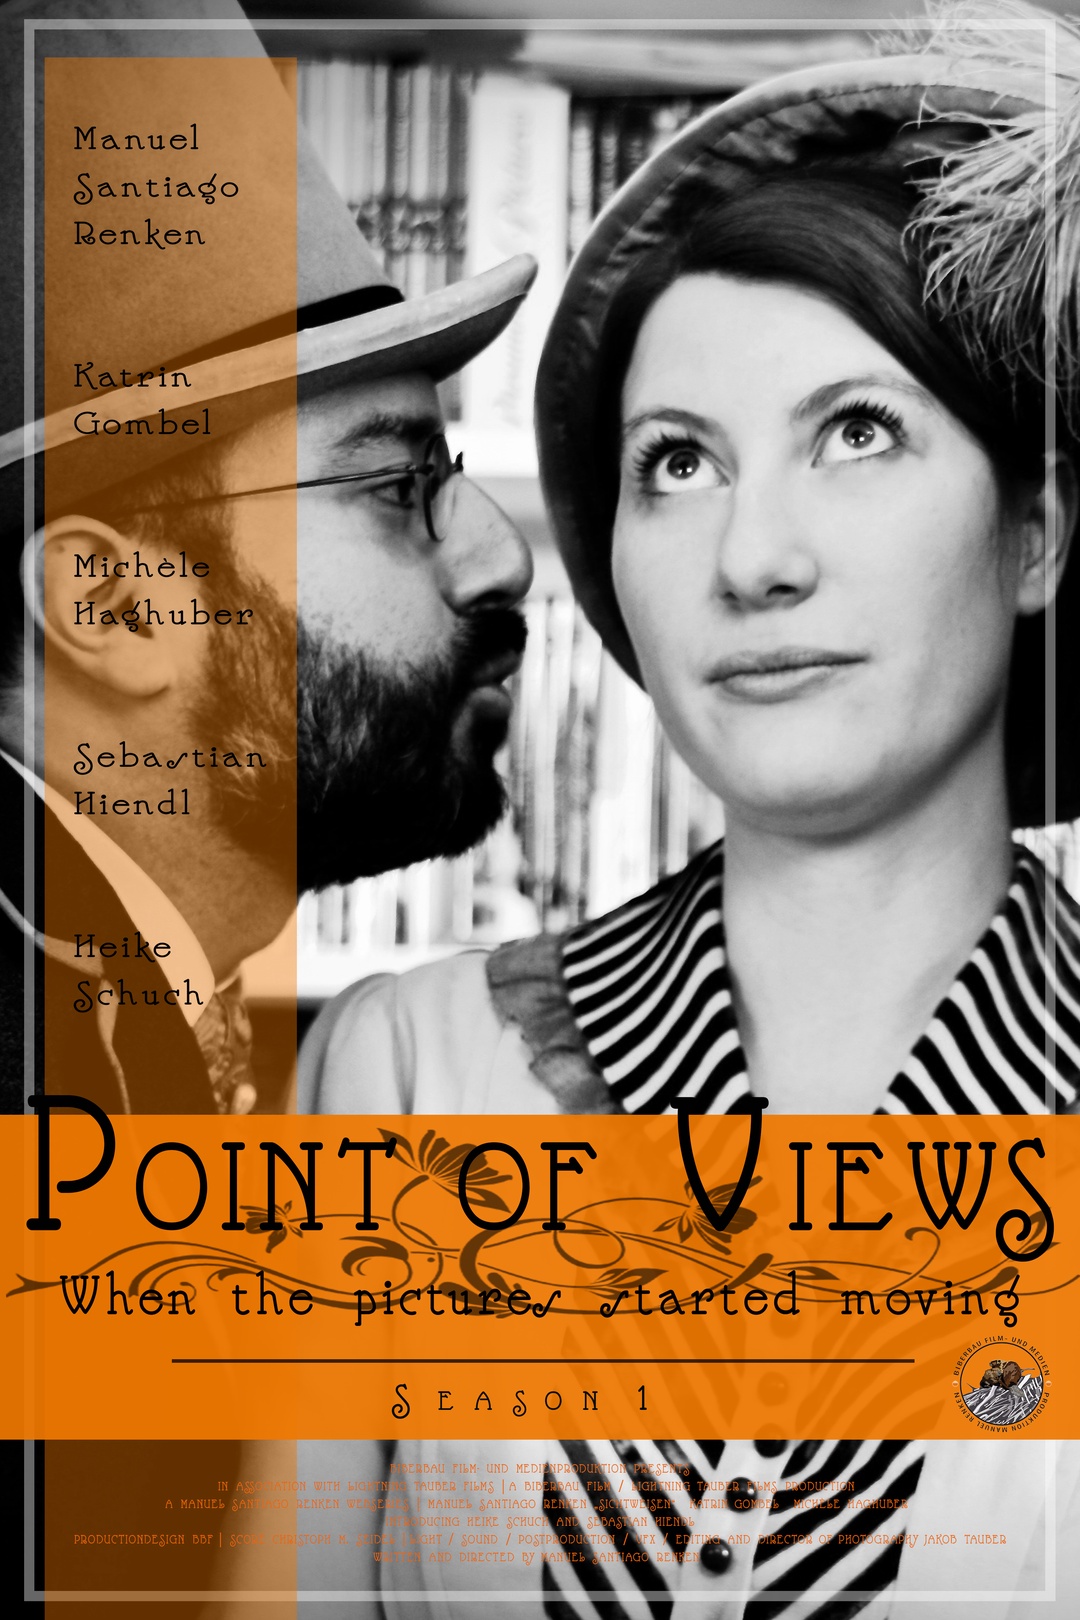 Point of Views - when the pictures startet moving